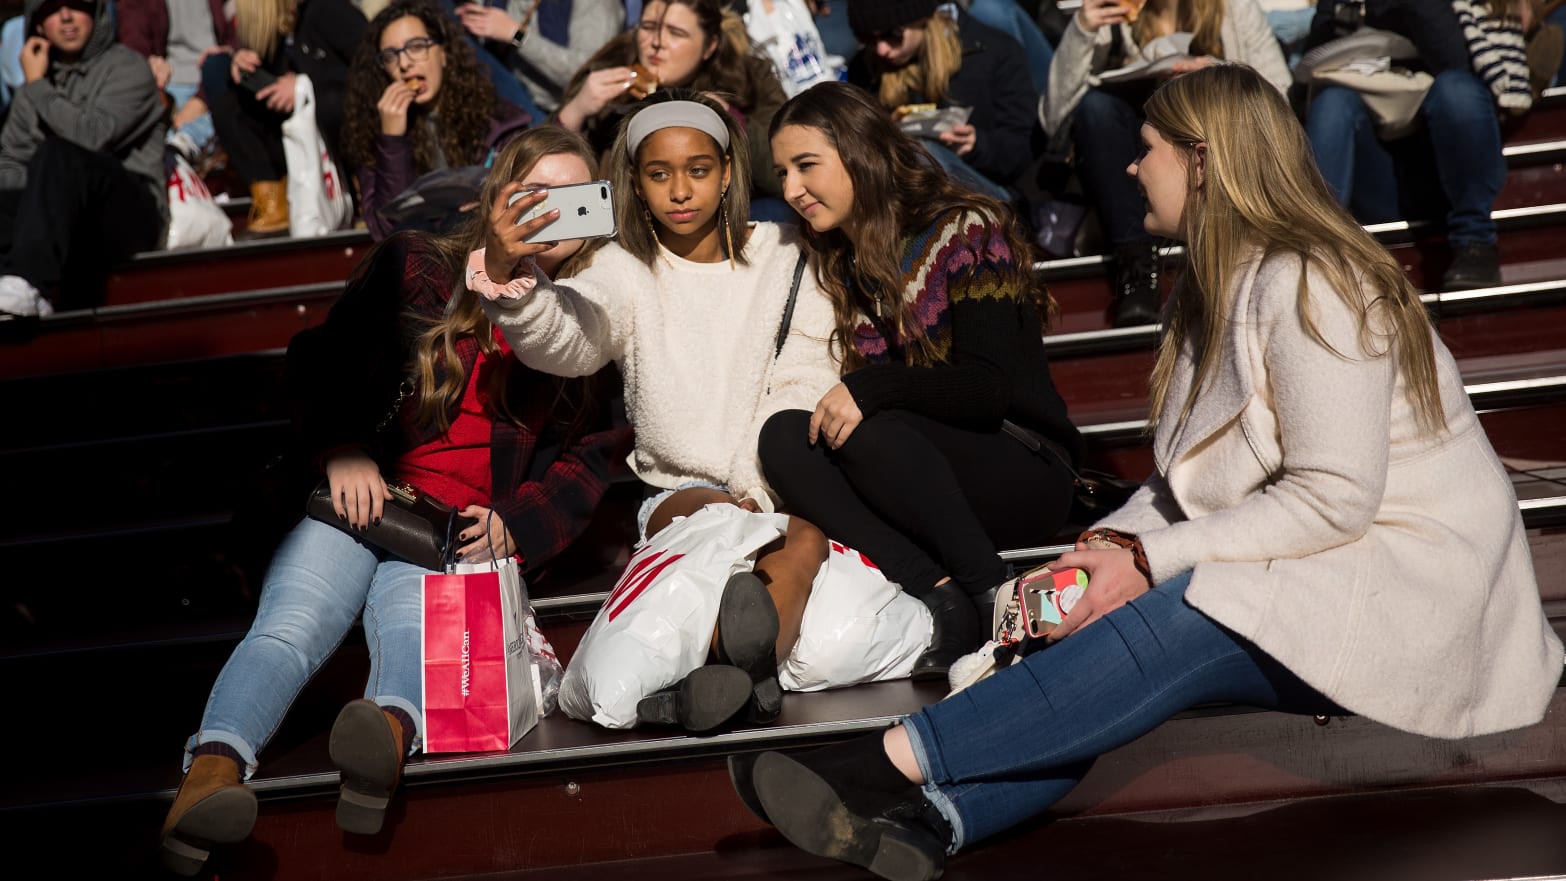 A group of teens take a photograph with a smartphone in Times Square, December 1, 2017 in New York City